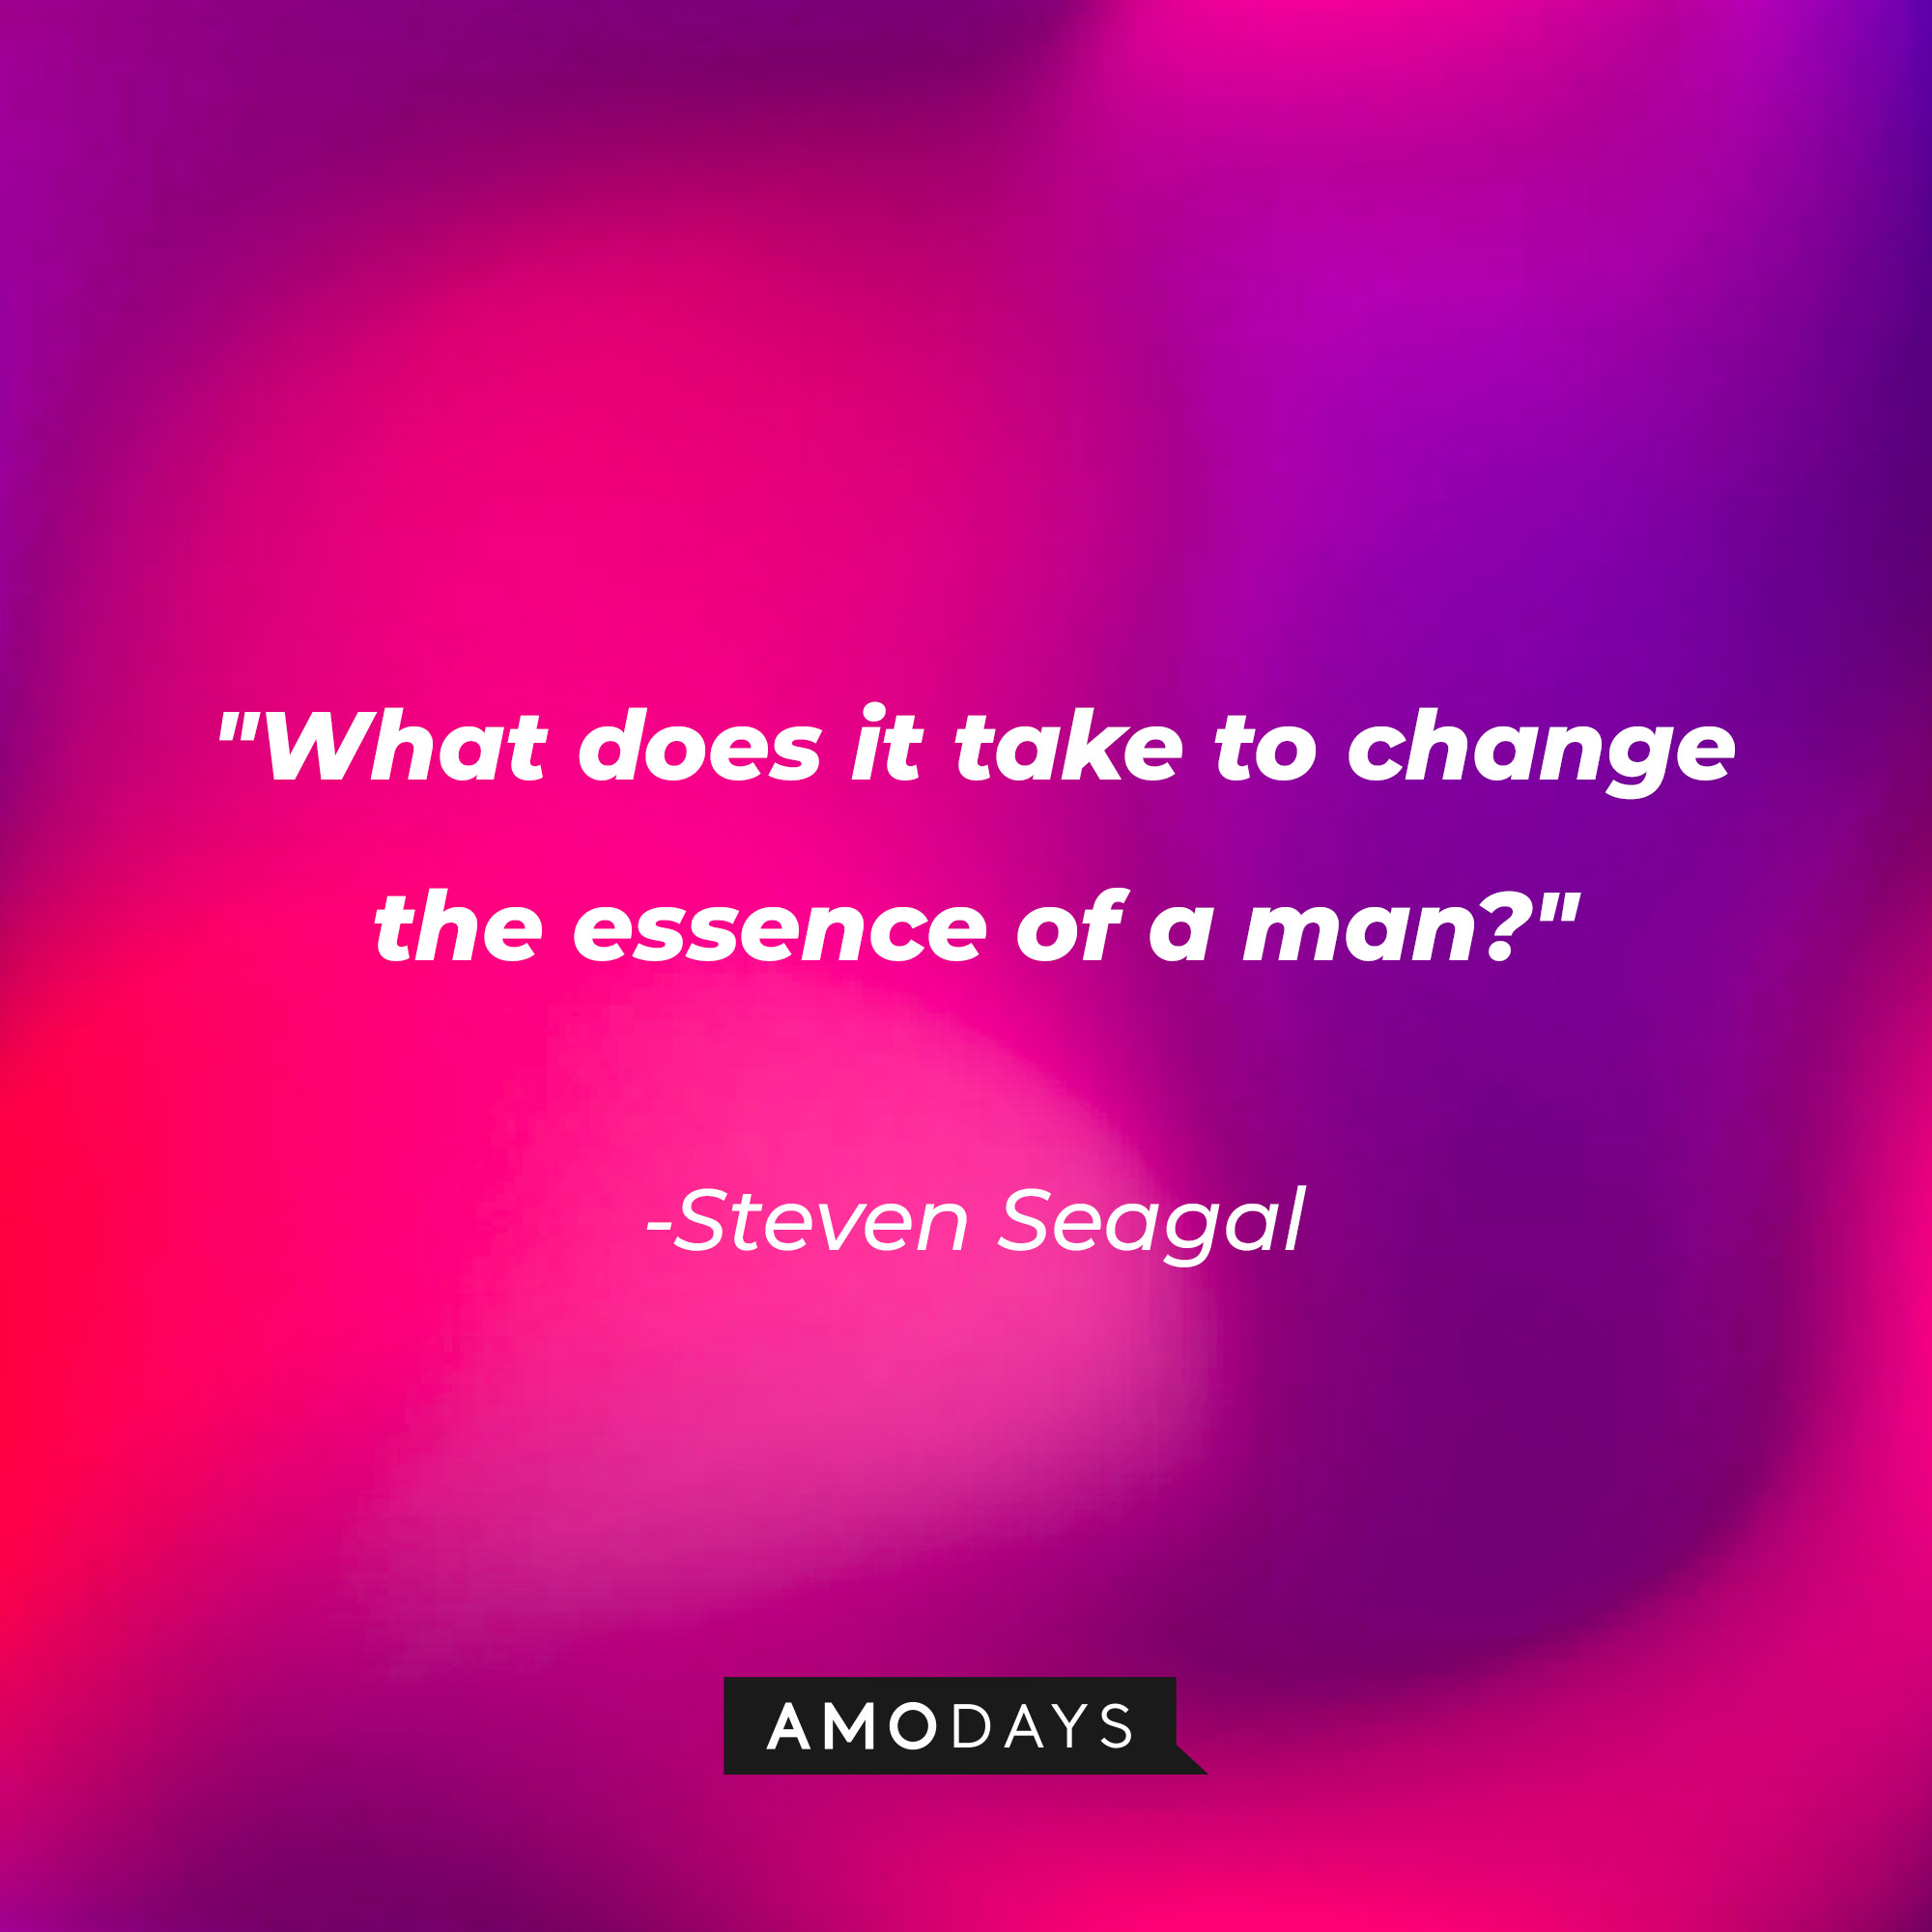 Steven Seagal’s quote: "What does it take to change the essence of a man?" | Image: AmoDays